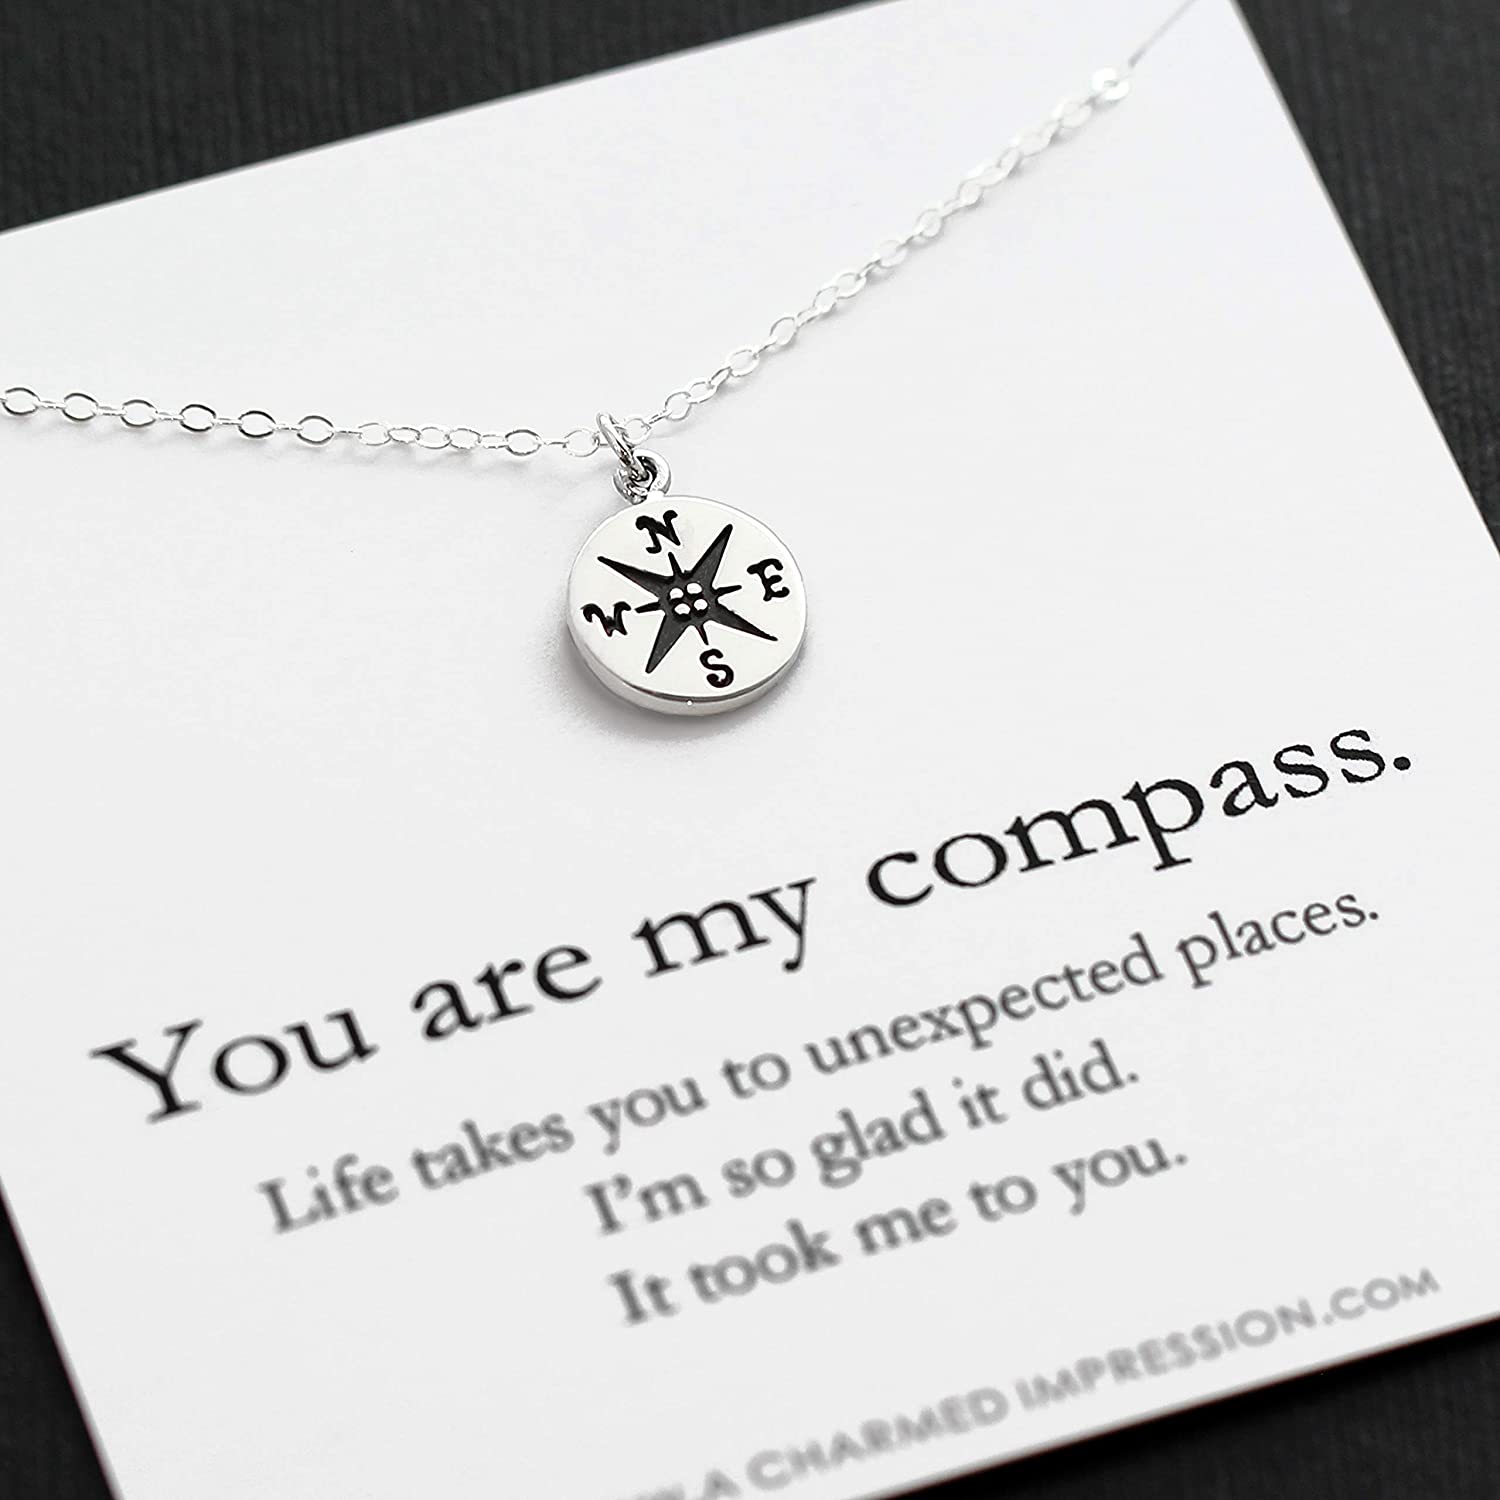 You are my Compass Necklace Wife Girlfriend Gift Alt